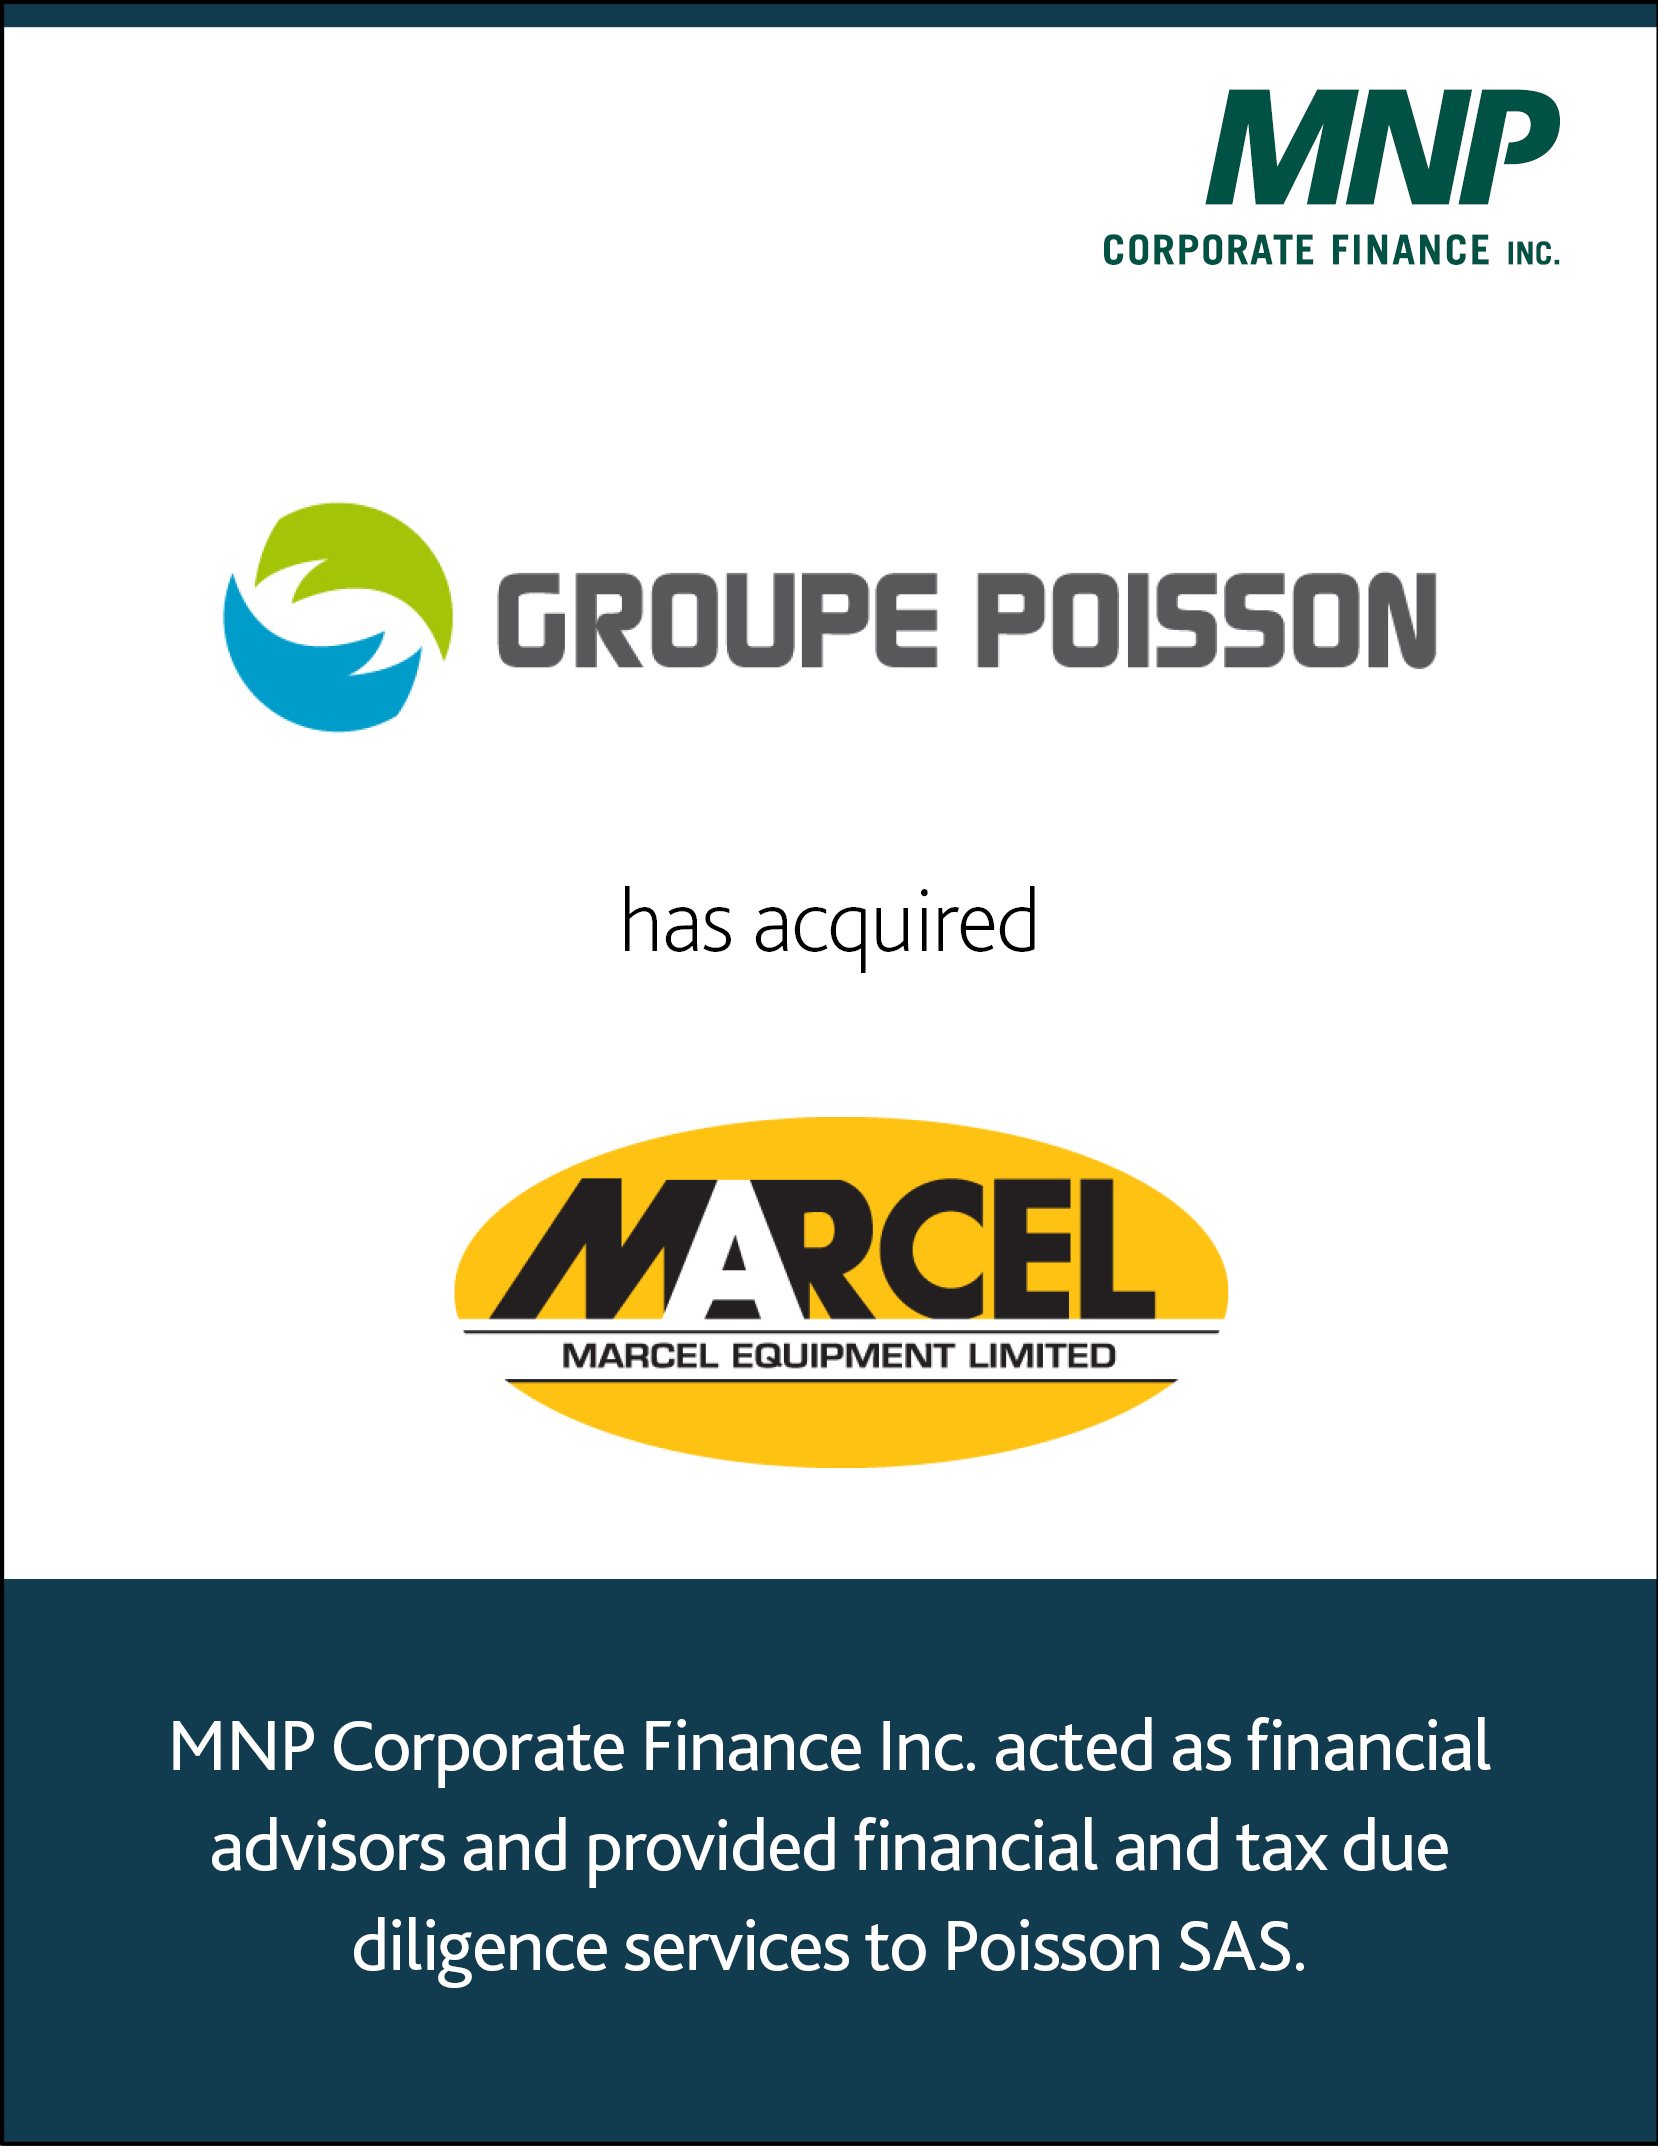 Poisson SAS has acquired Marcel Equipment Limited.